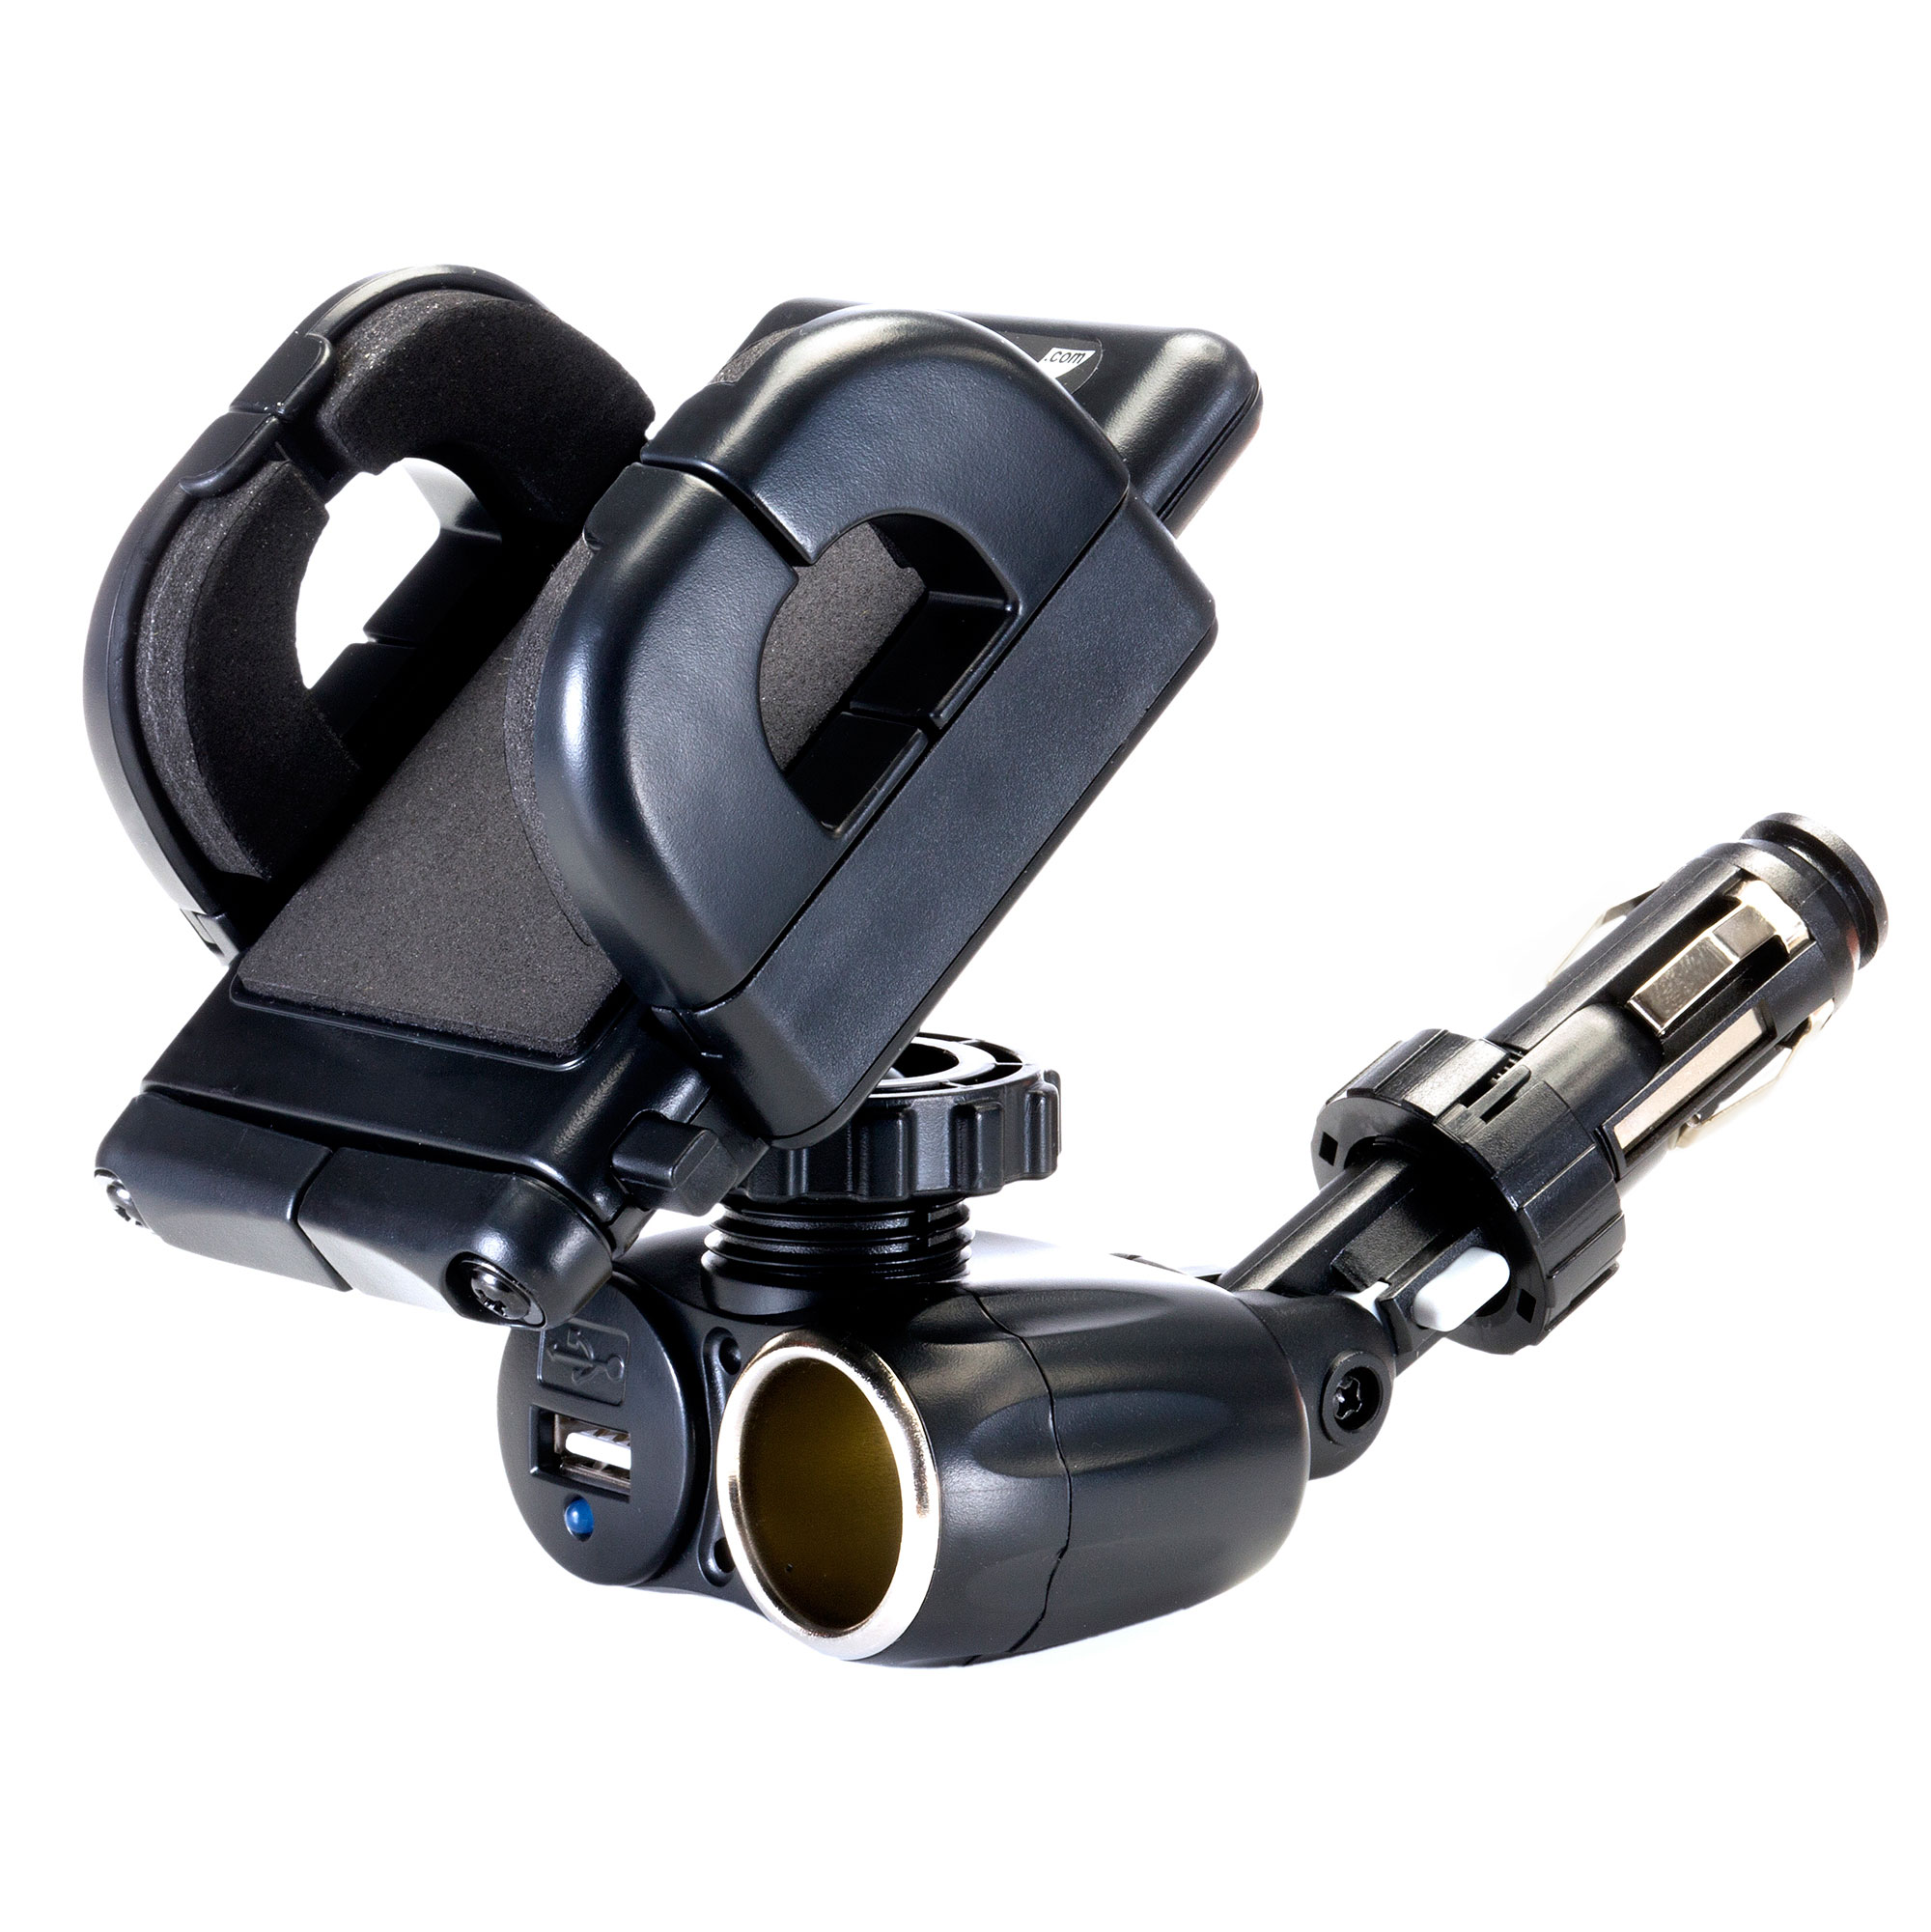 Dual USB / 12V Charger Car Cigarette Lighter Mount and Holder for the Motorola QUENCH